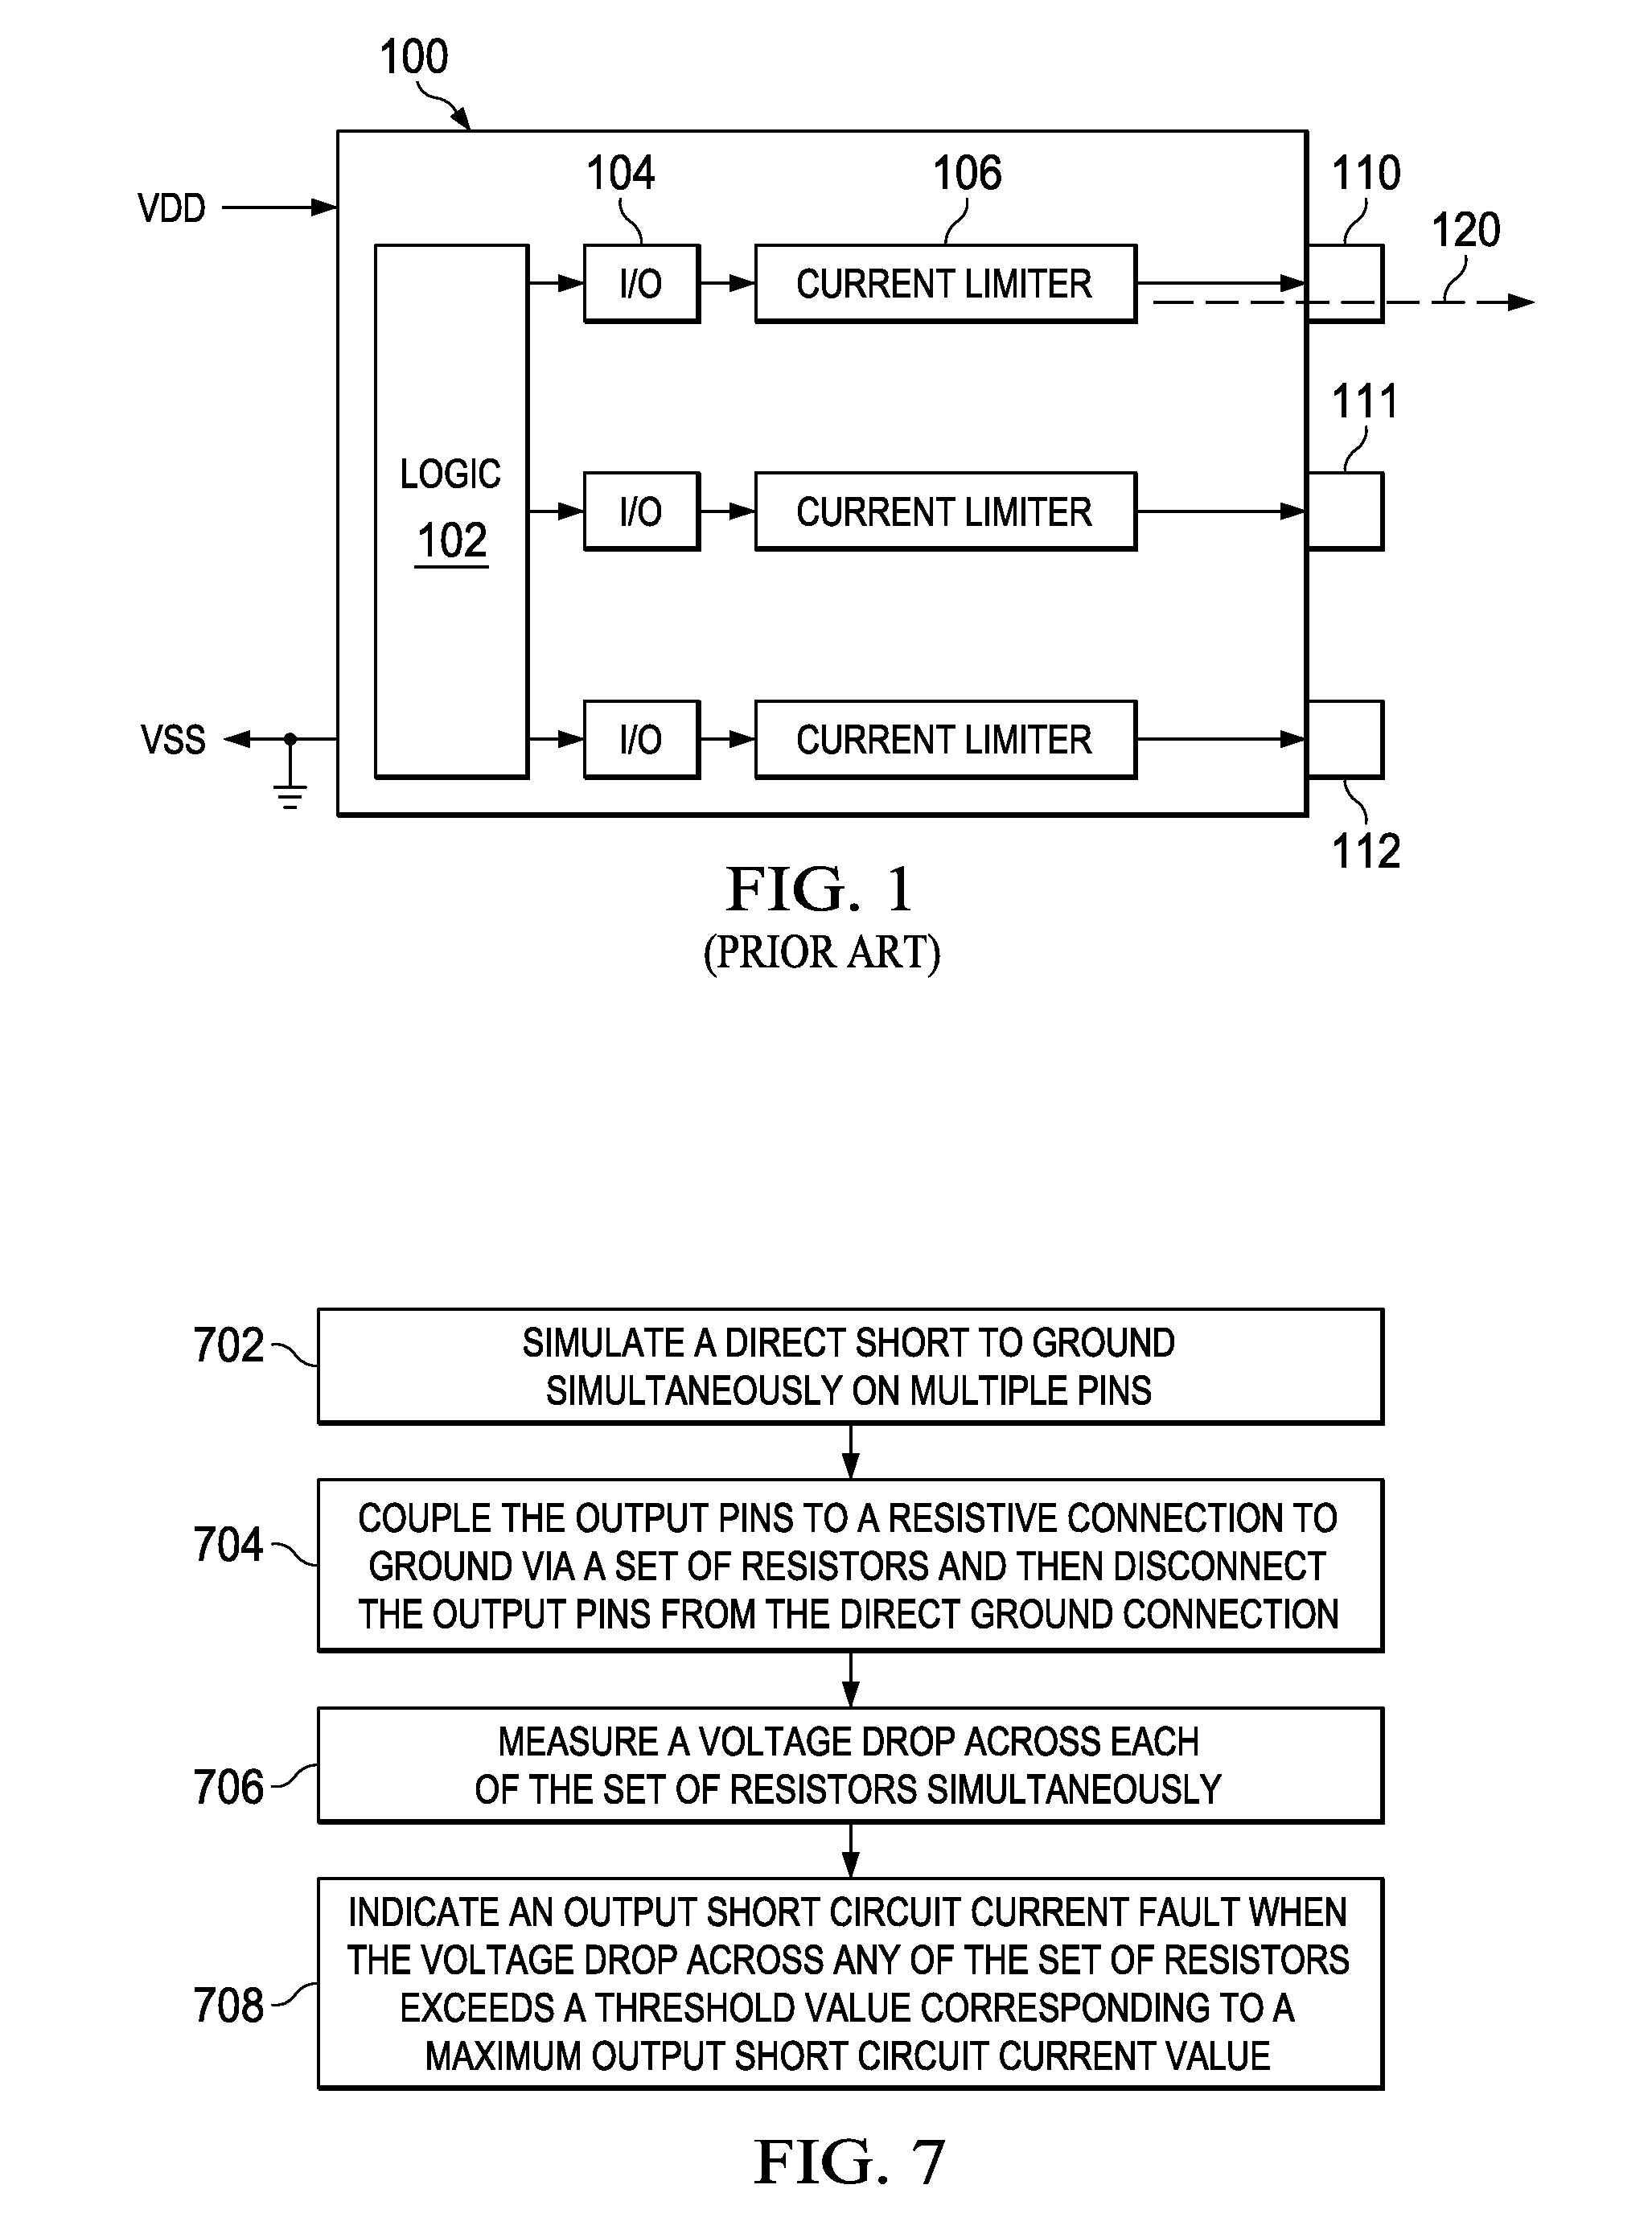 Testing Integrated Circuit Packaging for Output Short Circuit Current